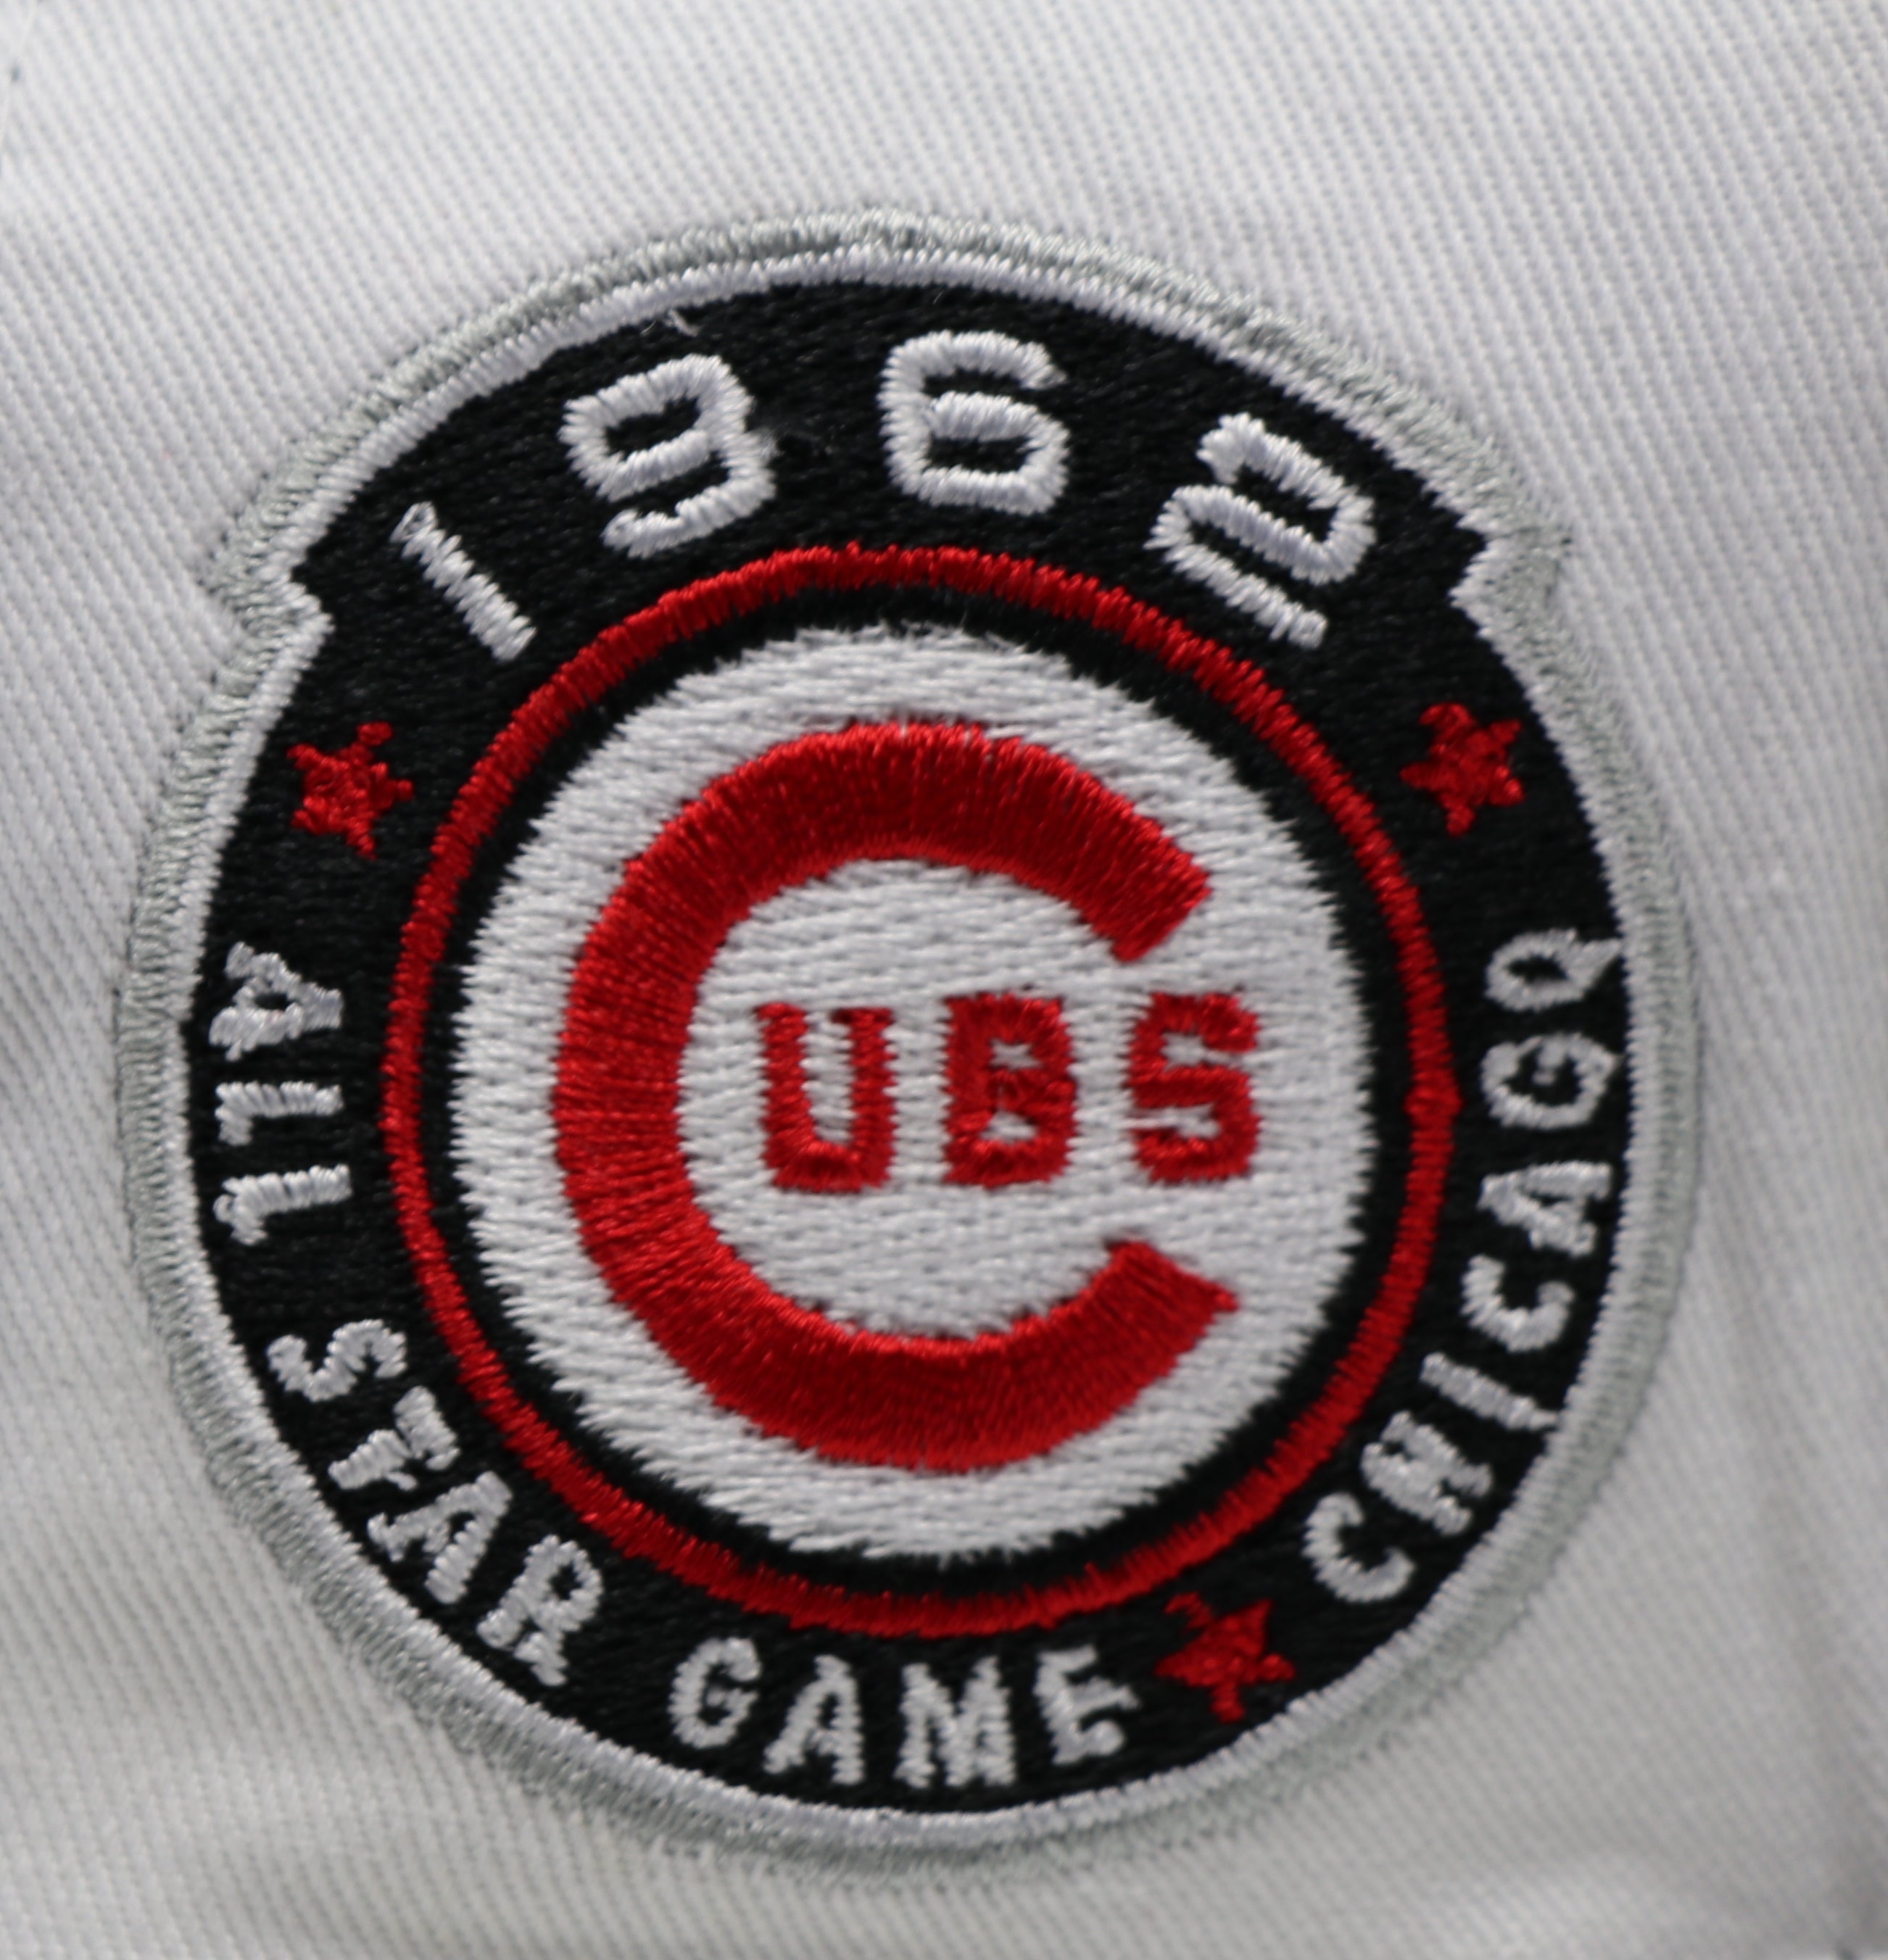 CHICAGO CUBS (WHITE) (1962 ASG) NEW ERA 59FIFTY FITTED (RED UNDER VISOR)